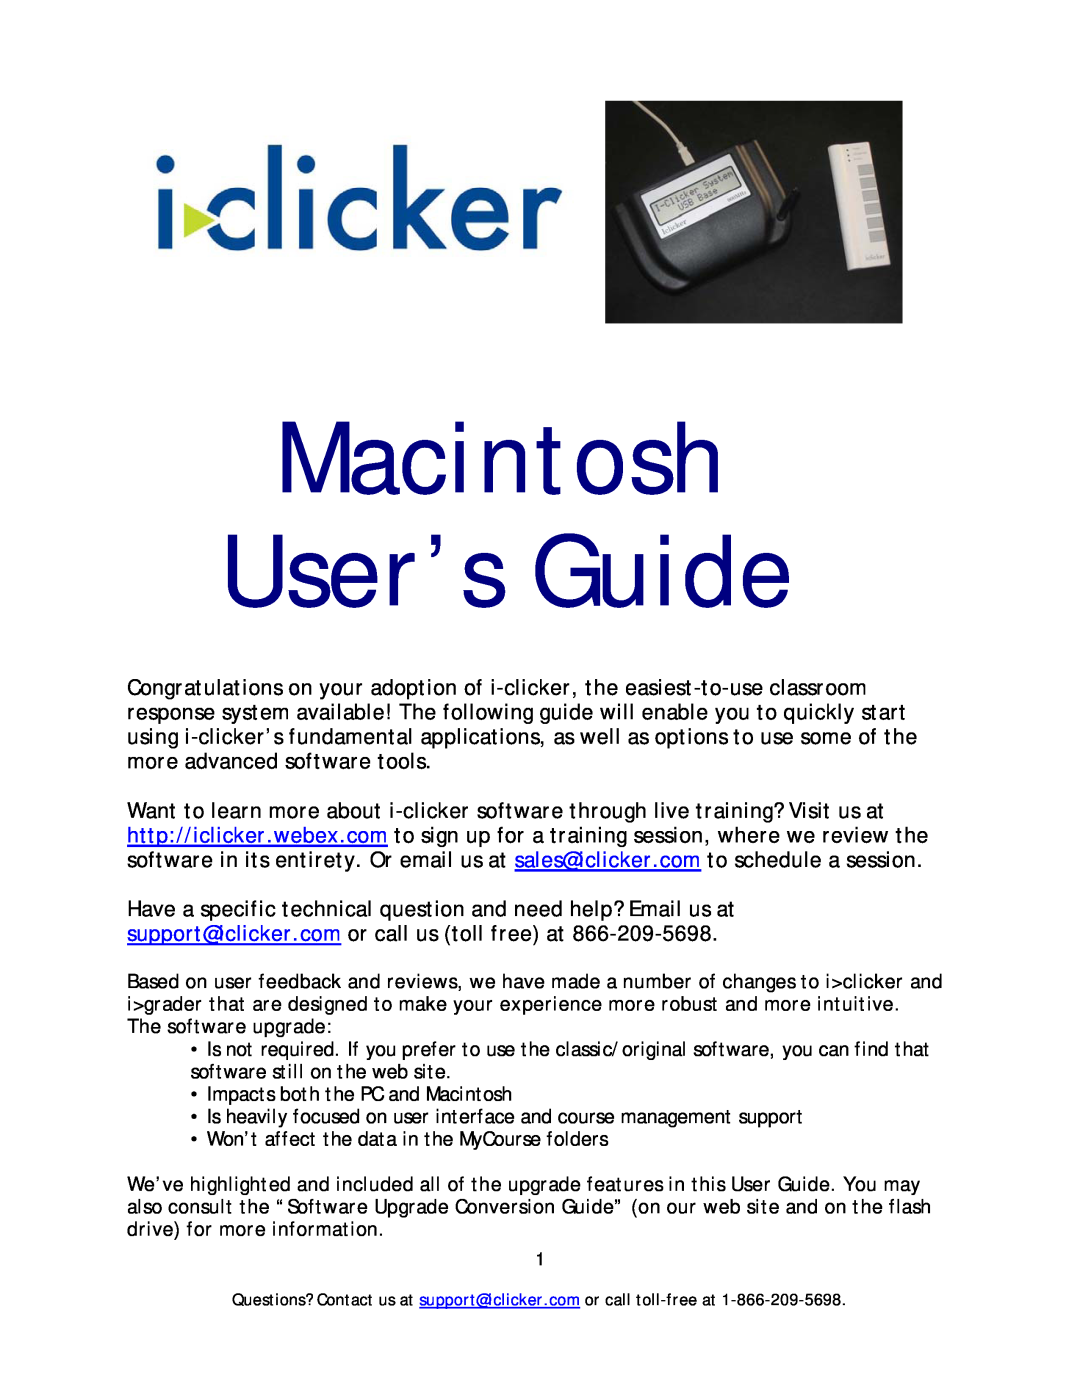 Apple Mouse manual Macintosh User’s Guide, Impacts both the PC and Macintosh 